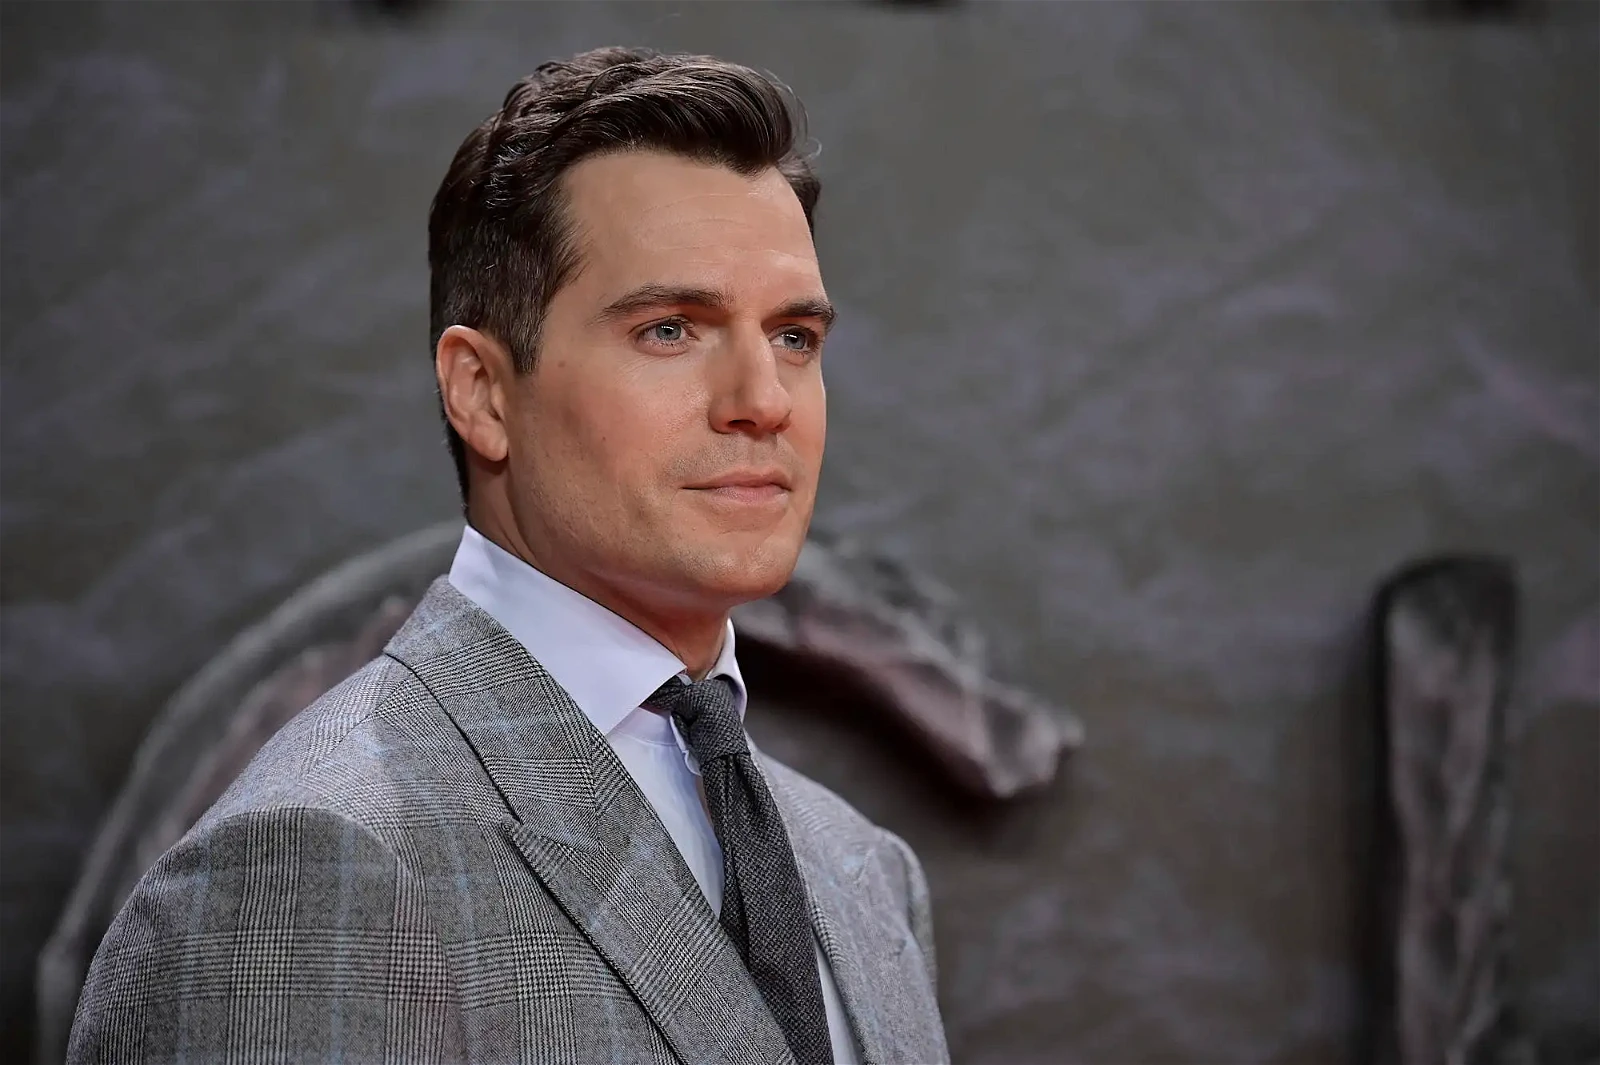 Henry Cavill is the #43 most handsome man in the world.